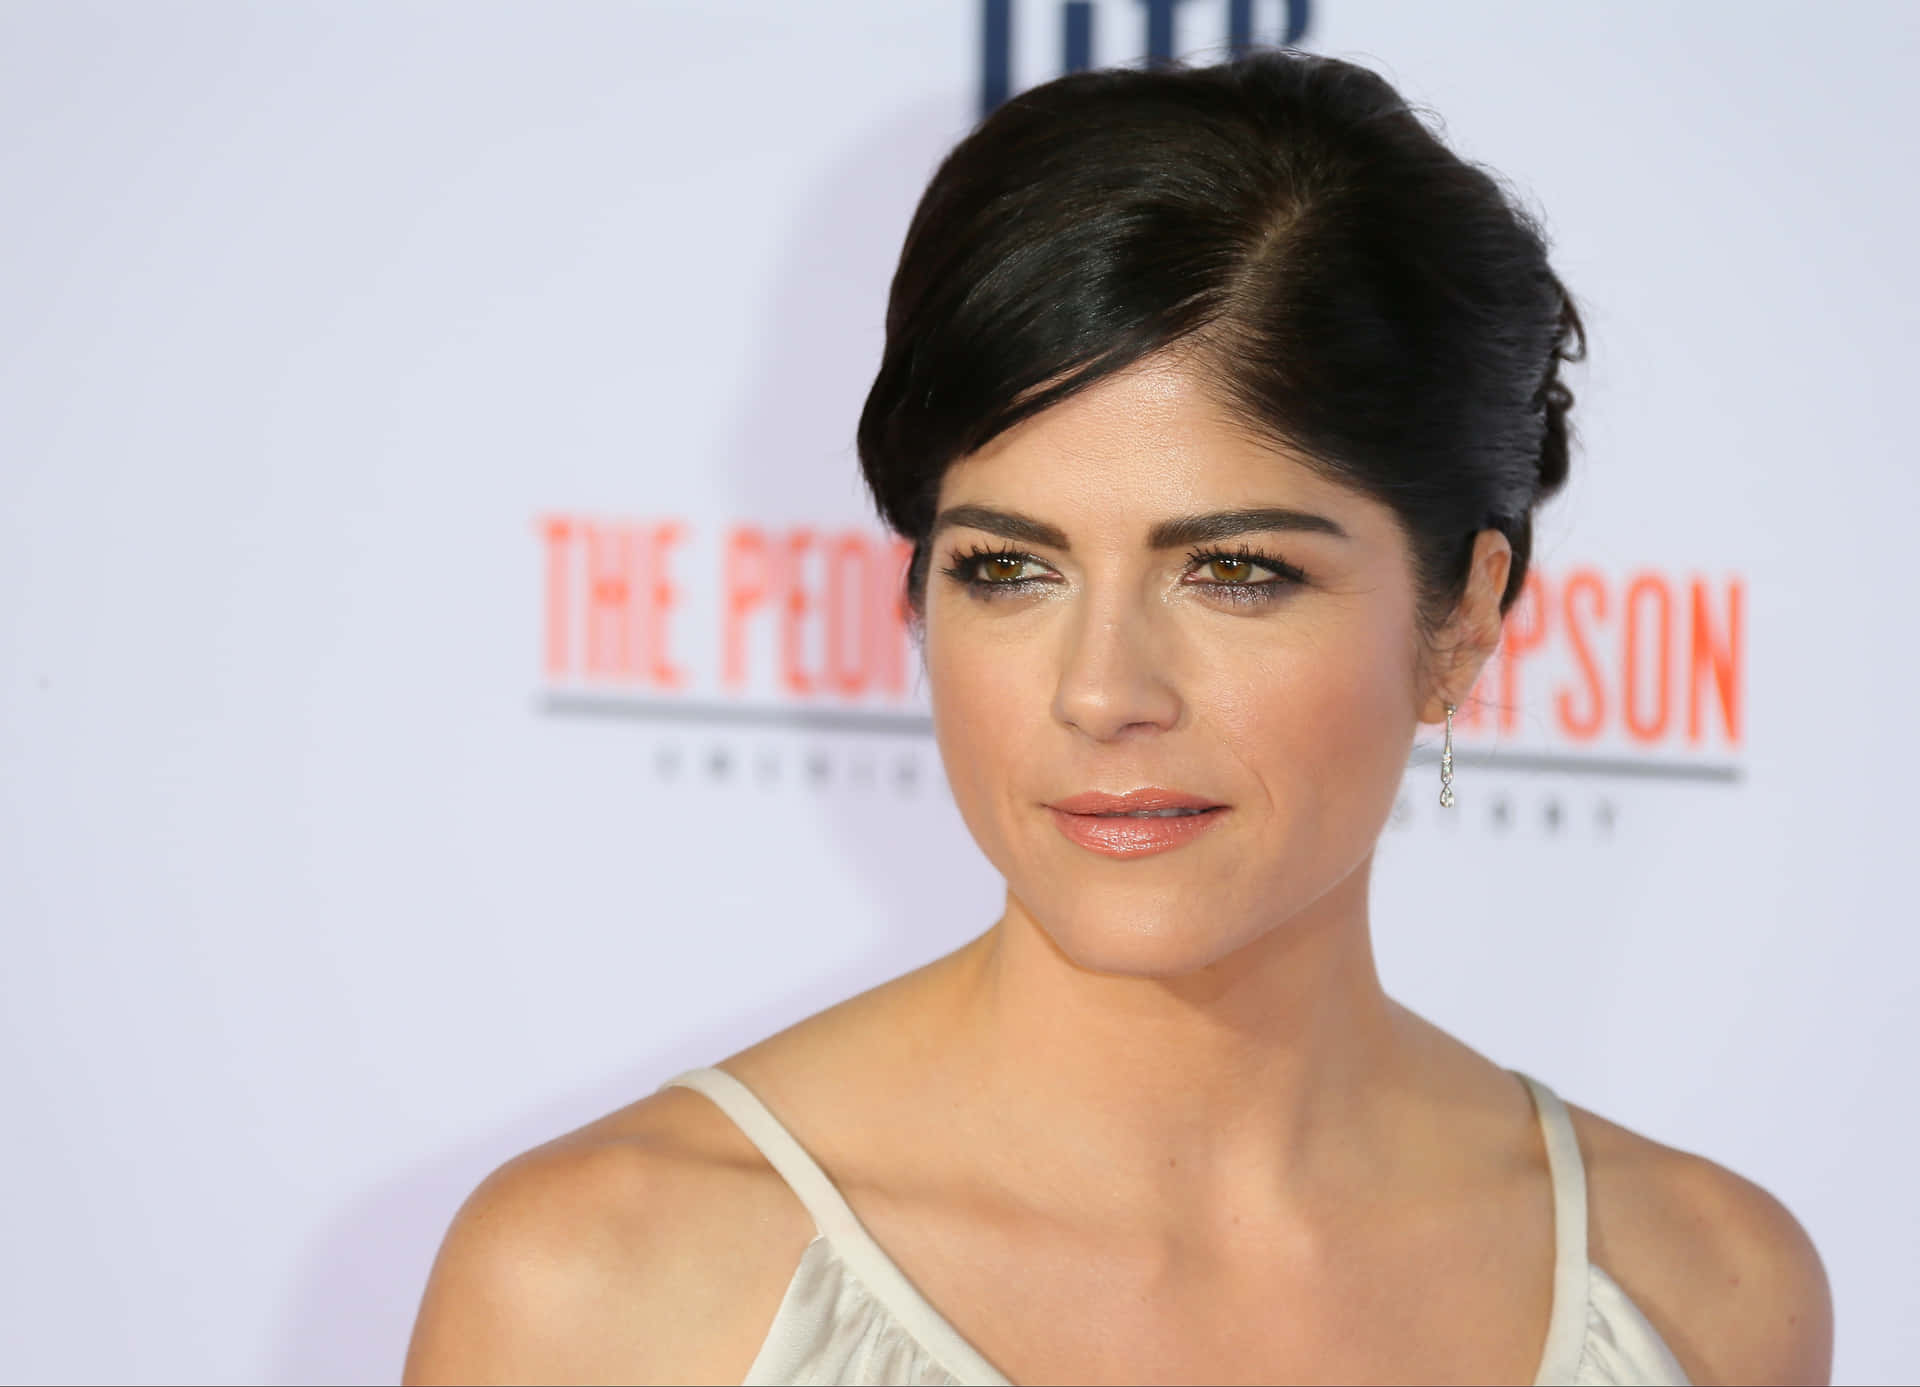 Selma Blair posing in an elegant outfit, smiling charmingly for the camera Wallpaper